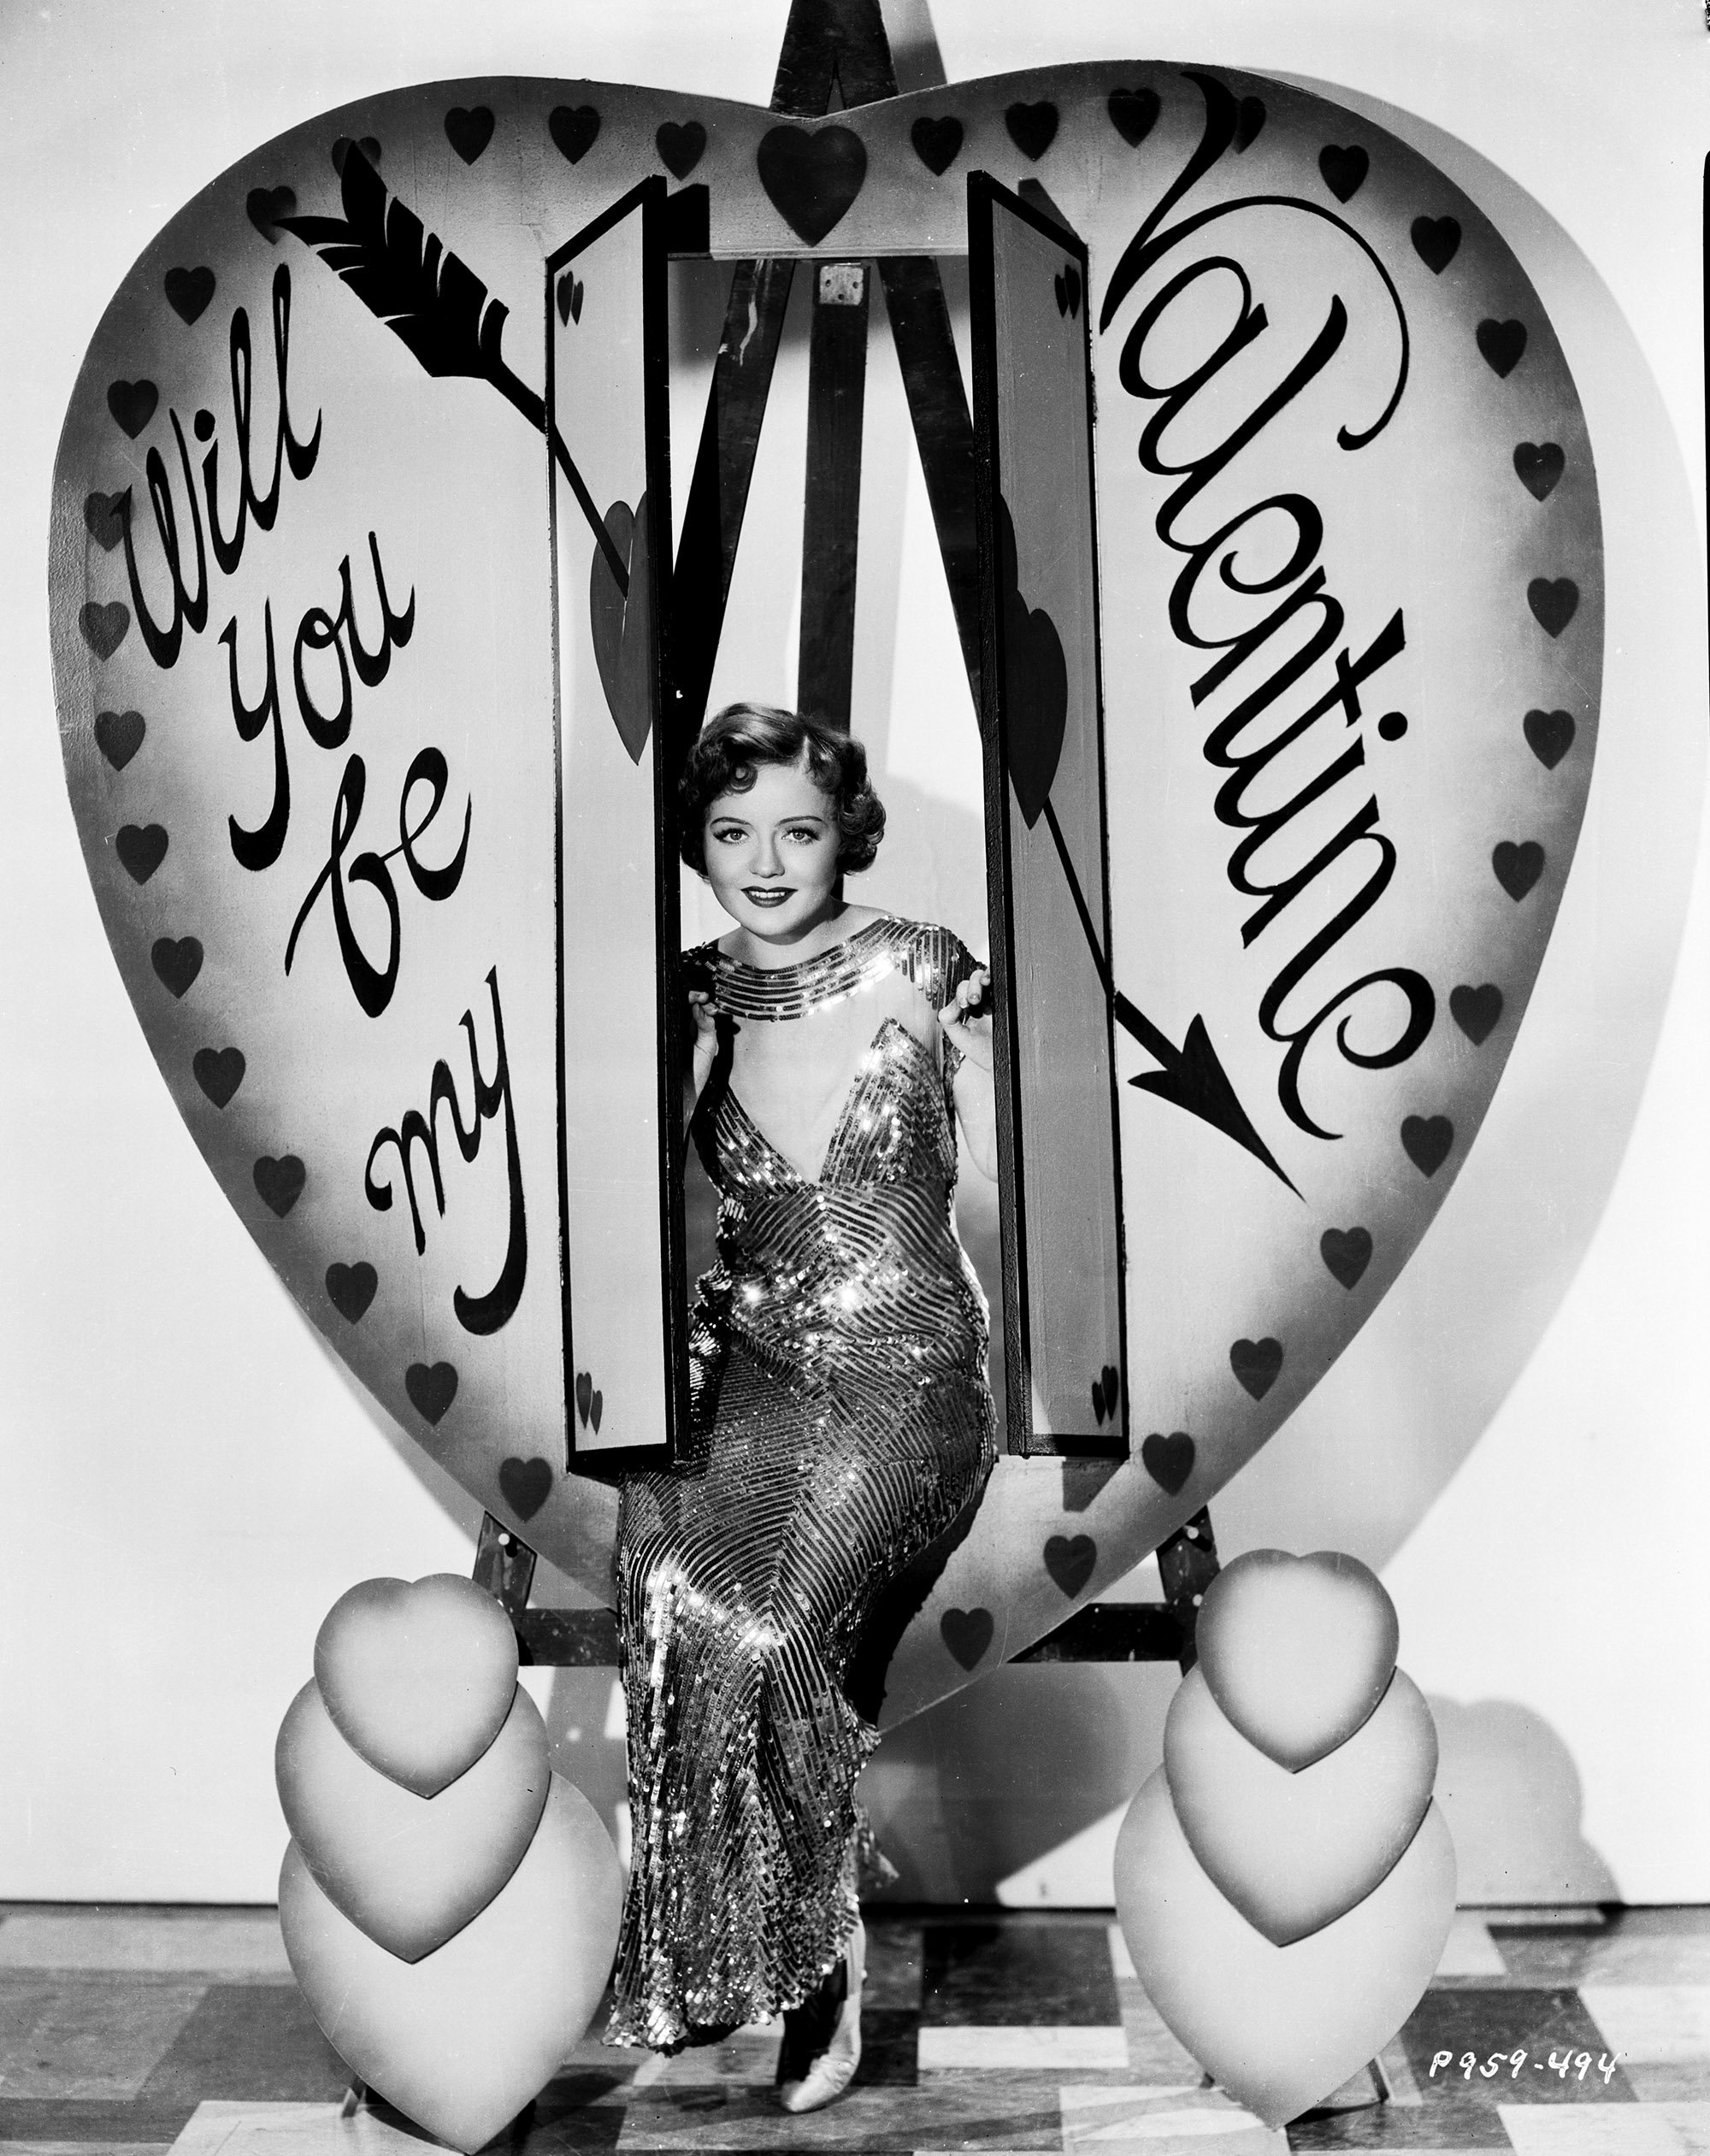 Portrait of actress Nancy Carroll sitting inside a prop heart labeled 'Will You Be My Valentine', for Paramount Pictures, 1929.